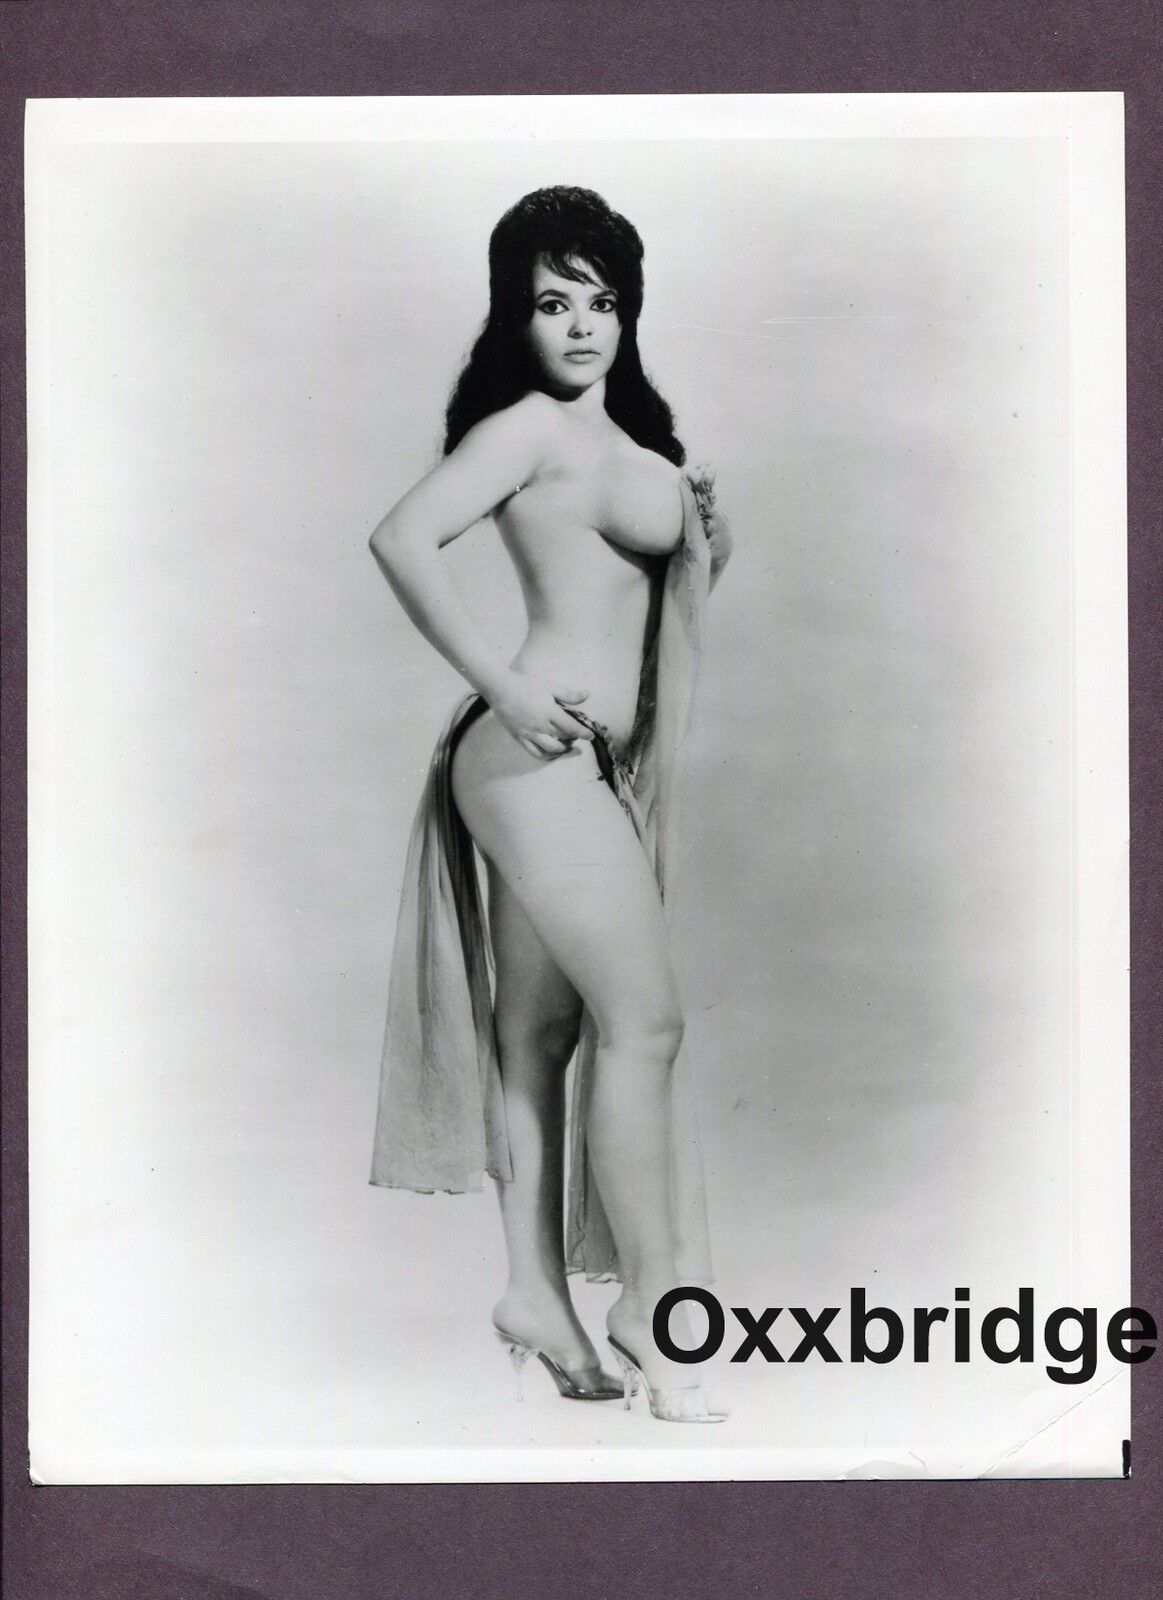 Big Busty Buxom Huge Firm Breasts Girl Gorgeous 1960 Original Nude Pinup Photo